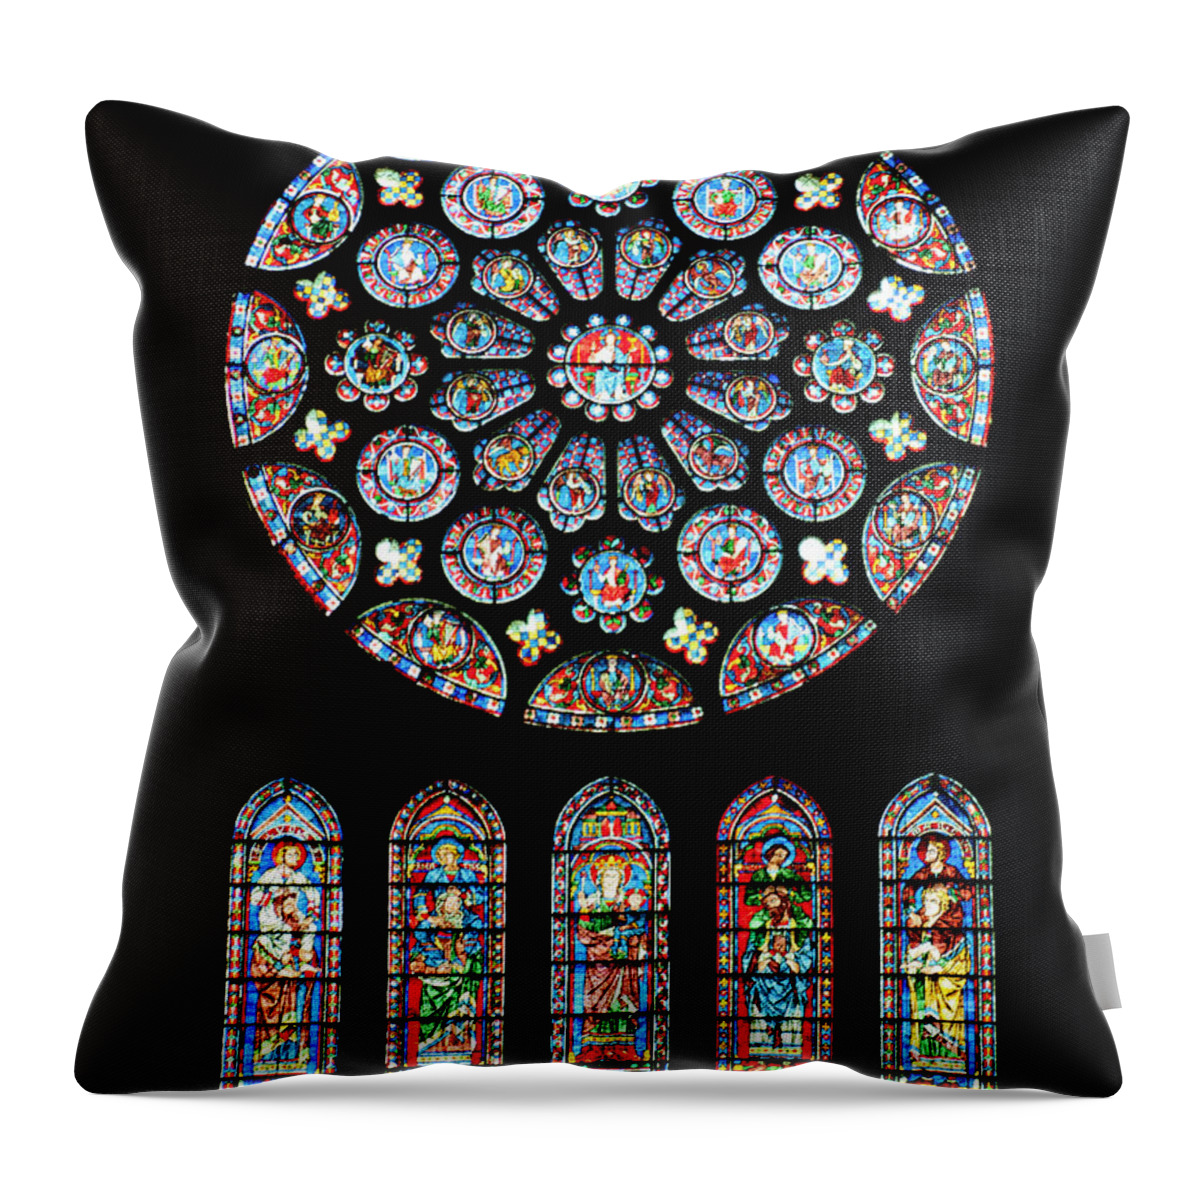 Vitraux Throw Pillow featuring the photograph Vitraux - Cathedrale de Chartres - France by Jean-Pierre Ducondi